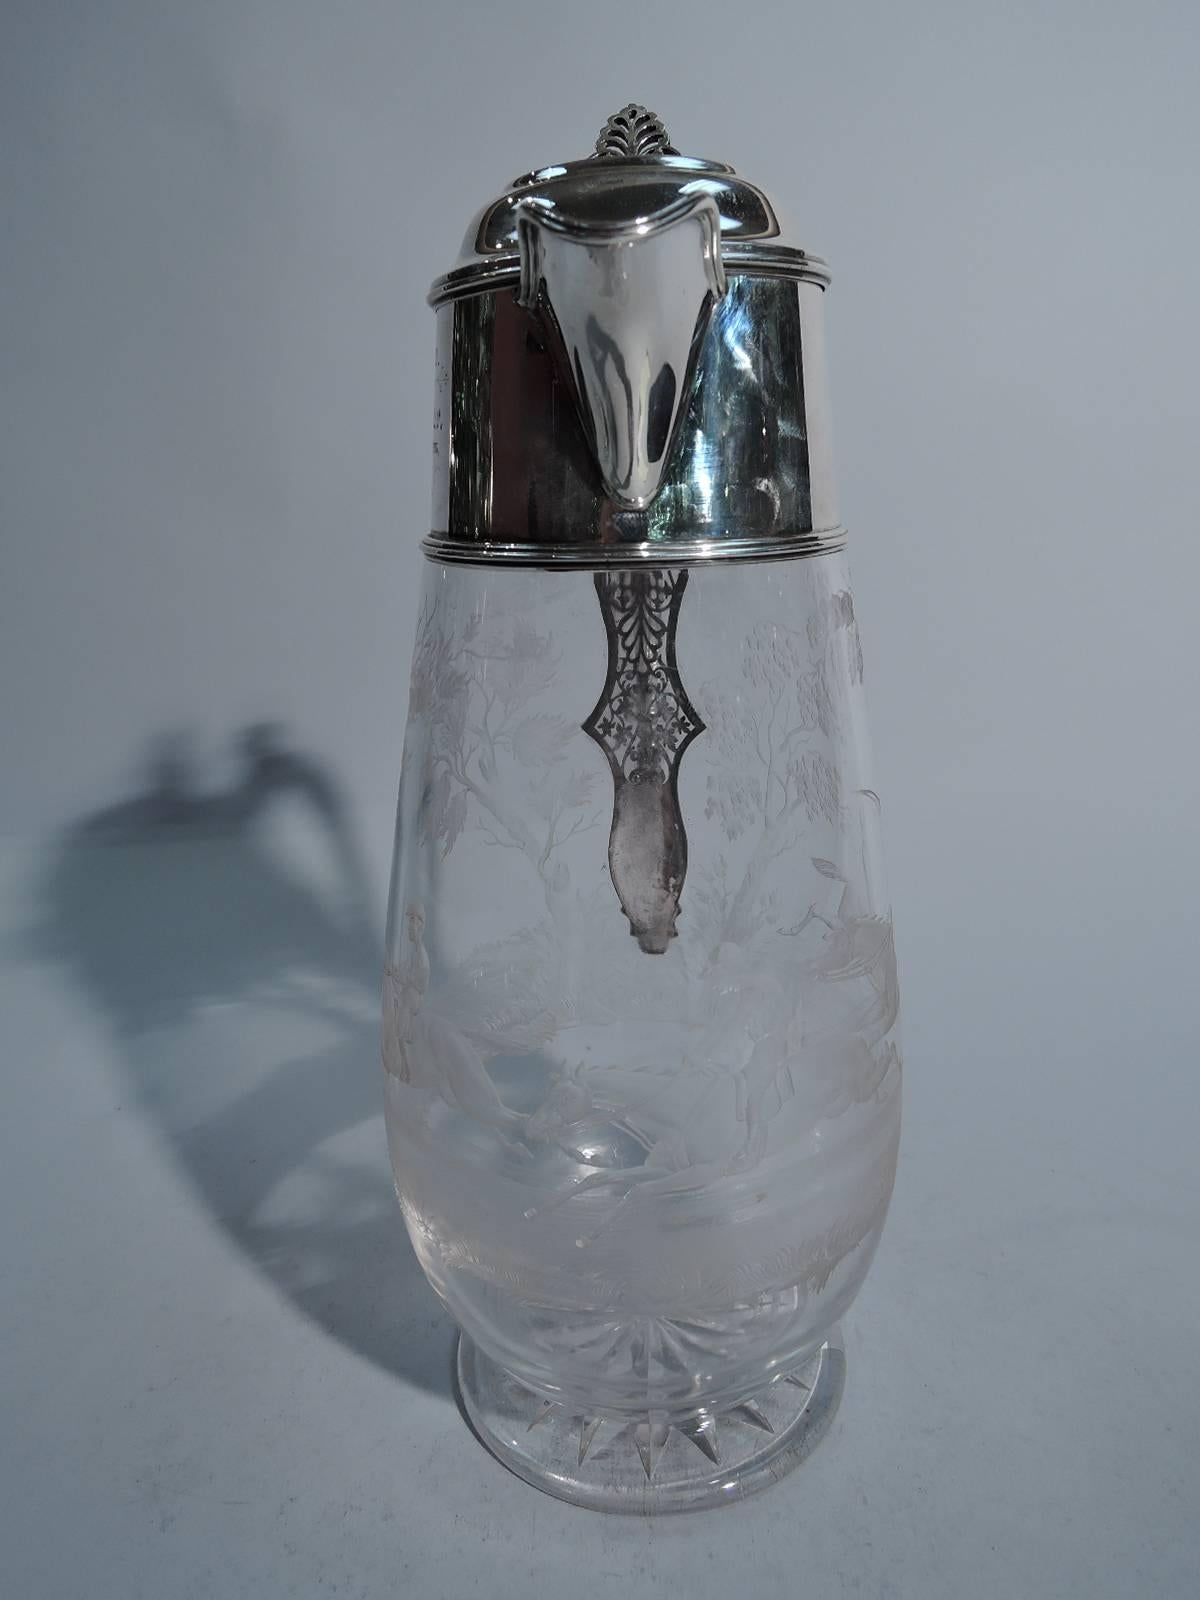 Victorian sterling silver and glass decanter. Made by Elizabeth Hutton in London in 1883. Clear glass upward tapering sides and circular foot. Acid-etched hunting scene with crop-wielding rider spurring on his galloping companions. Neck has silver